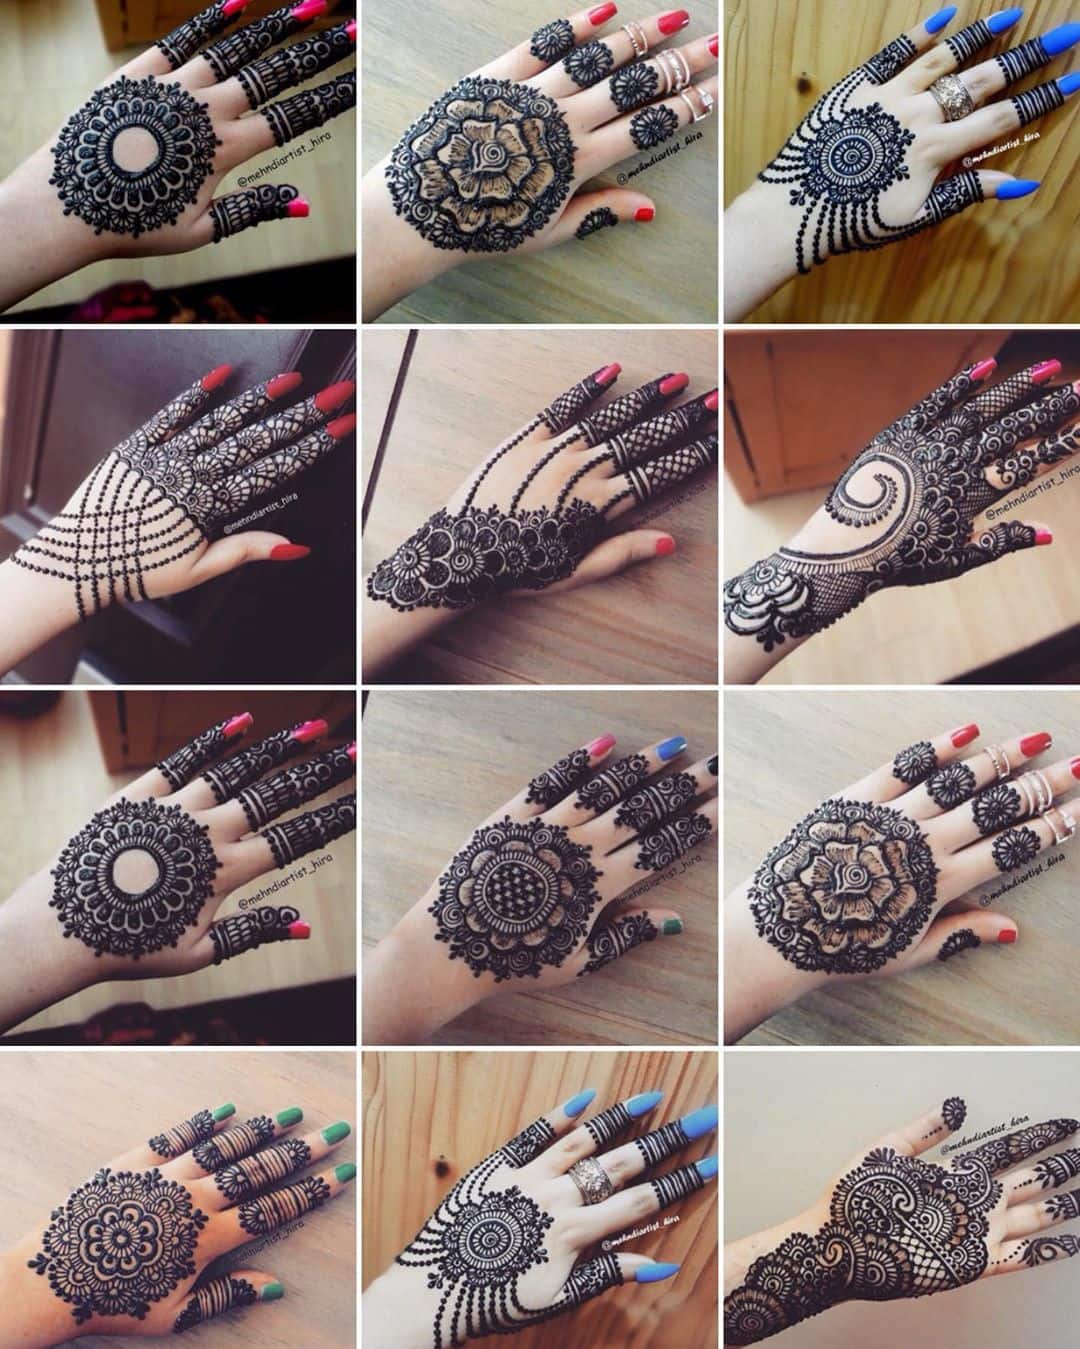 Drawing Step By Step Pencil Mehndi Design - Learn how to draw a pencil